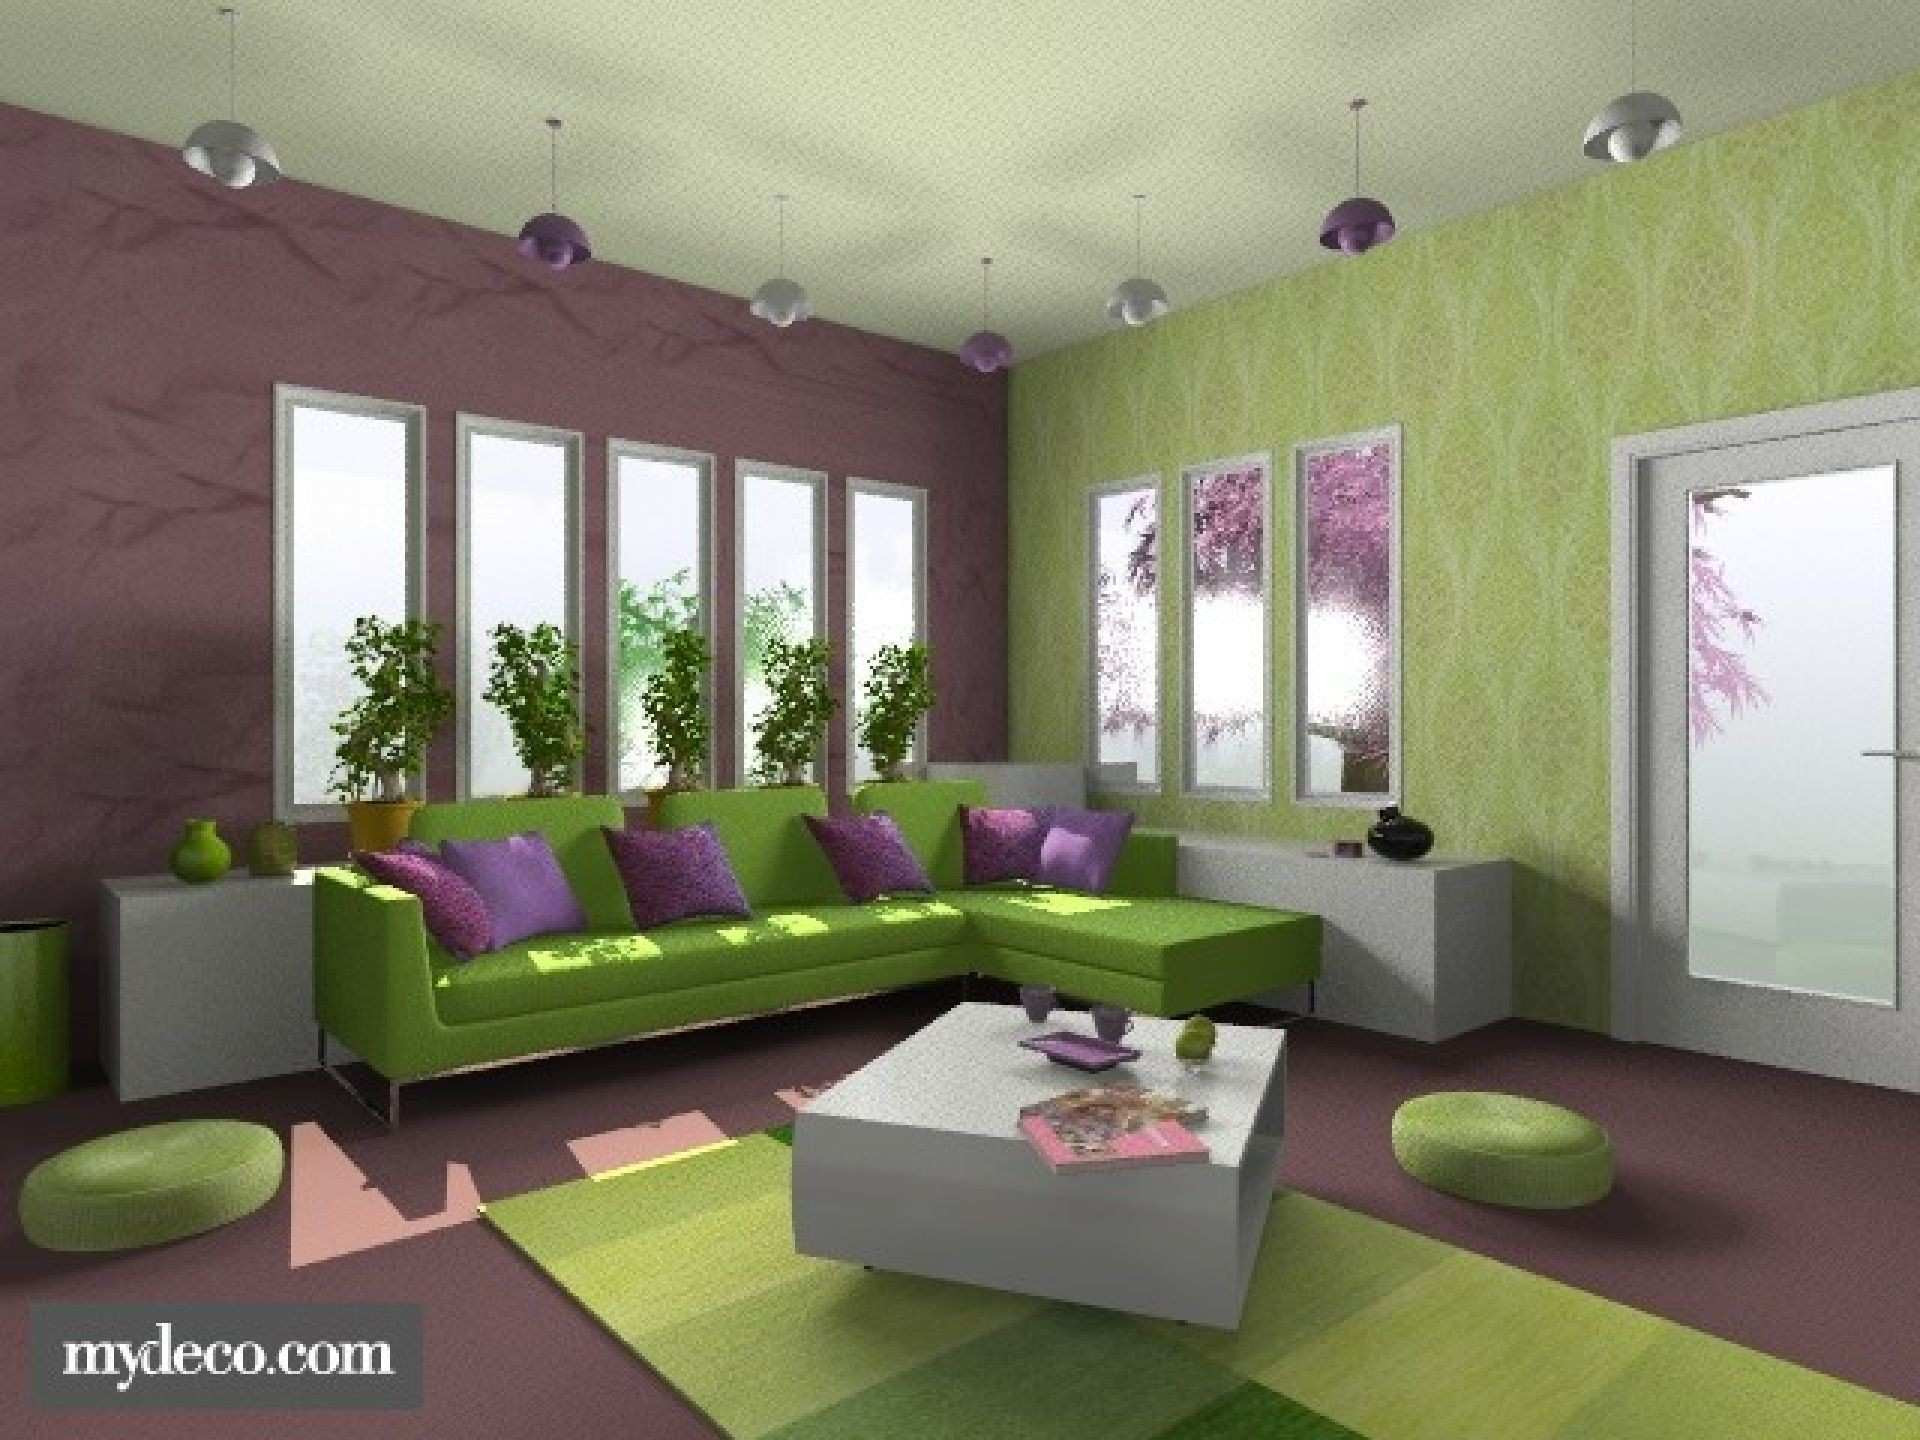 30 Cute Living Room Vase with Sticks 2024 free download living room vase with sticks of decorating ideas for living rooms with green walls inspirational big within decorating ideas for living rooms with green walls beautiful bedroom living room c